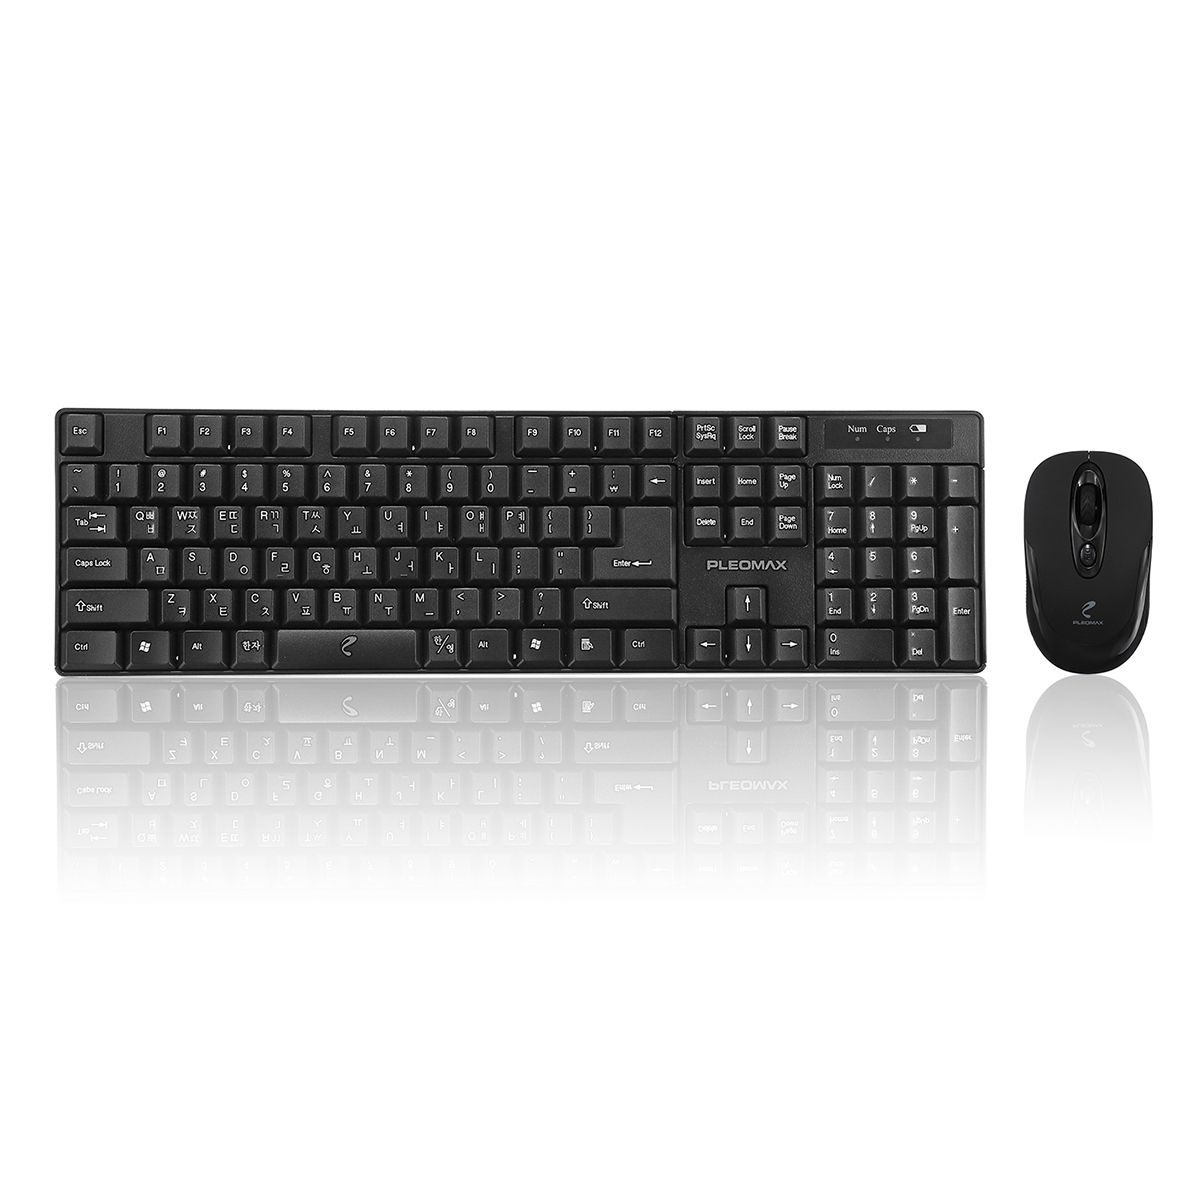 

800-1200-1600DPI Adjustable 2.4 GHZ Wireless Korean Keycaps Keyboard and Mouse Combo for Play Gaming Office